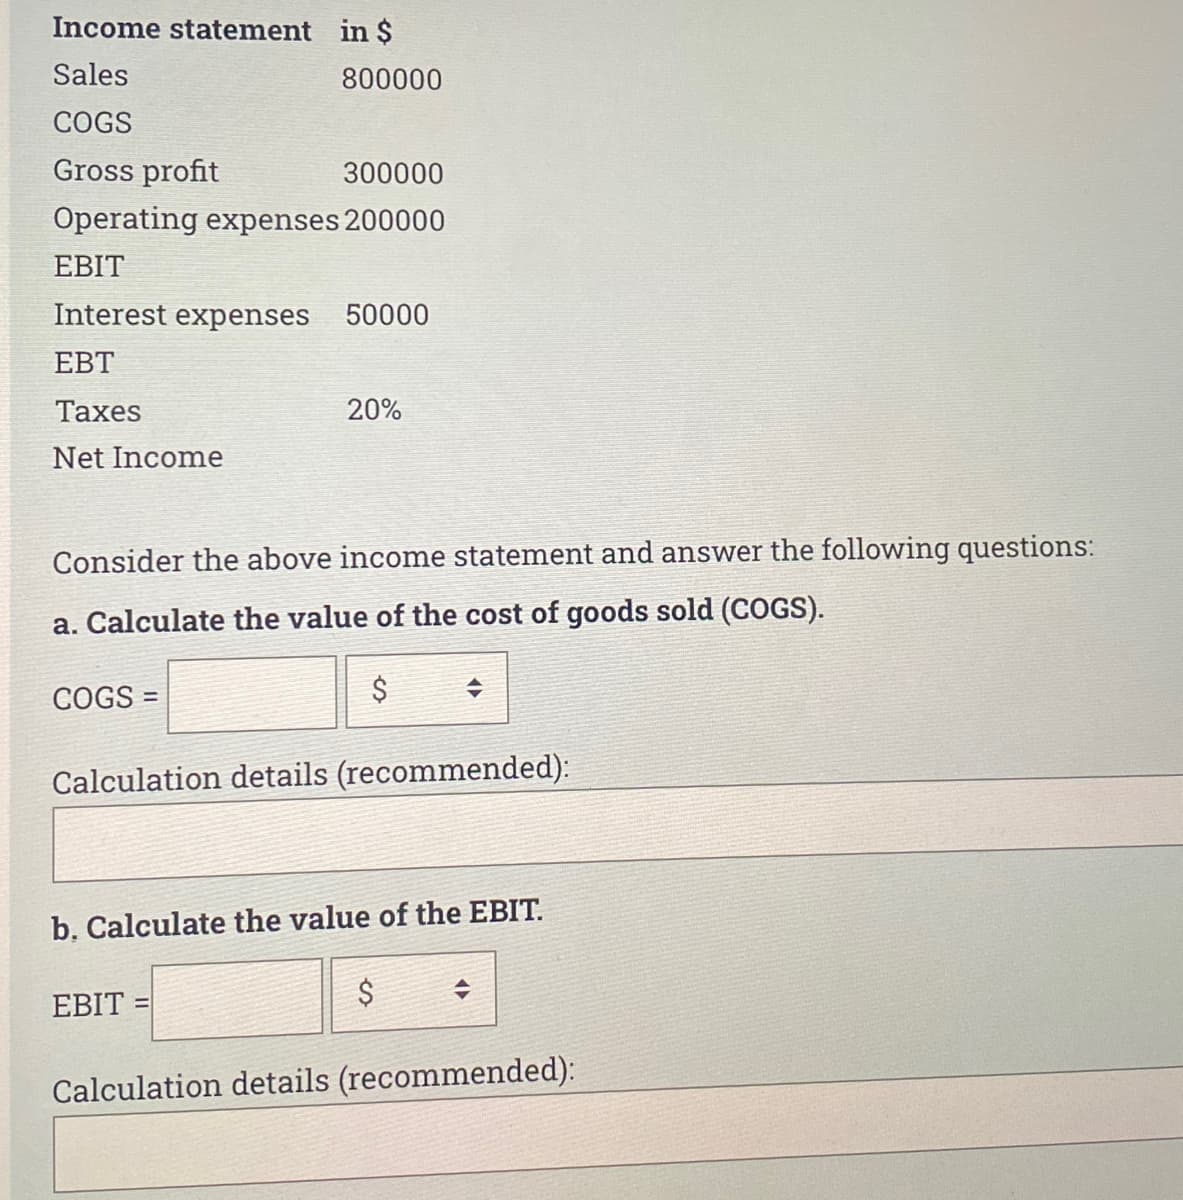 Income statement in $
Sales
COGS
Gross profit
300000
Operating expenses 200000
EBIT
Interest expenses 50000
EBT
Taxes
Net Income
800000
COGS =
Consider the above income statement and answer the following questions:
a. Calculate the value of the cost of goods sold (COGS).
$
20%
EBIT
Calculation details (recommended):
+
b. Calculate the value of the EBIT.
$
Calculation details (recommended):